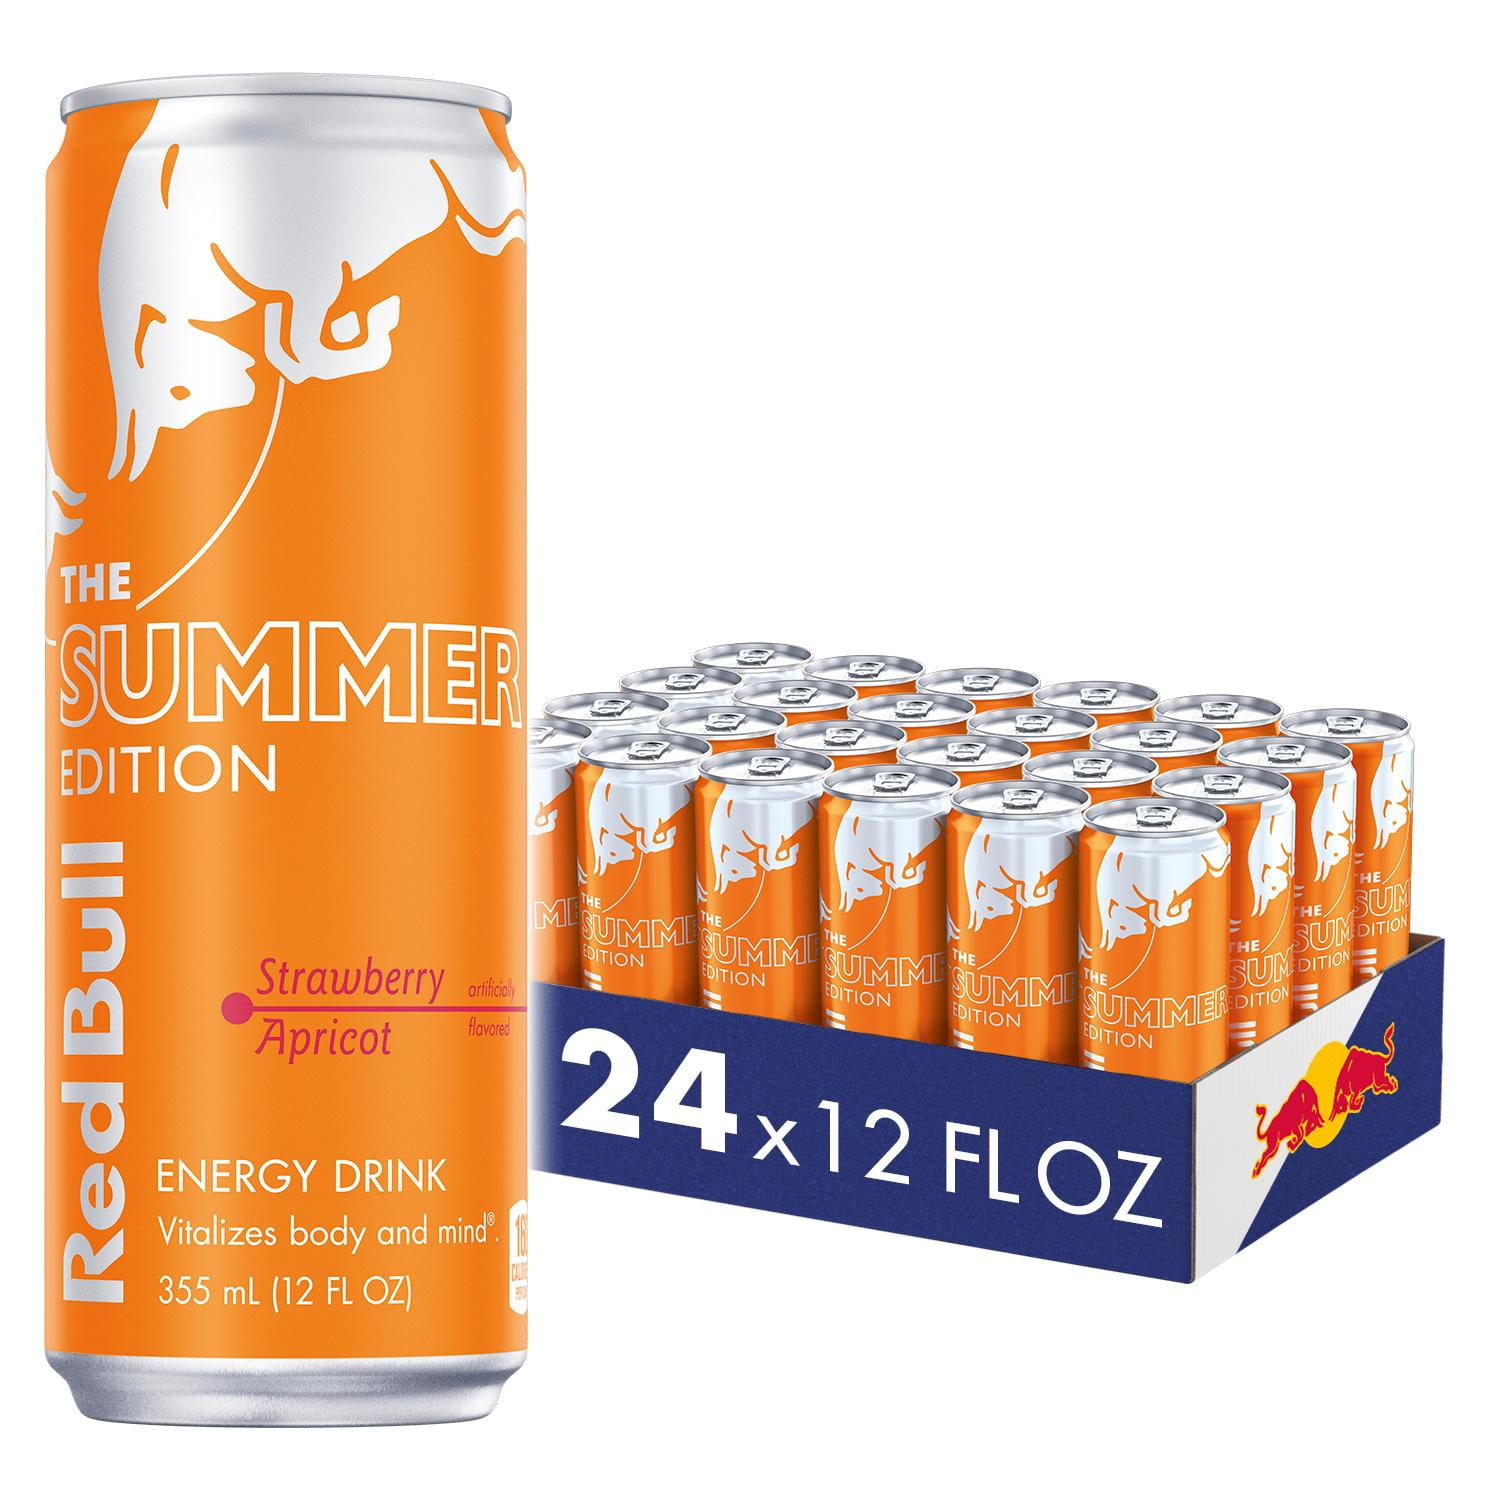 RED BULL SUMMER EDITION, STRAWBERRY APRICOT 12OZ, 24 Pack